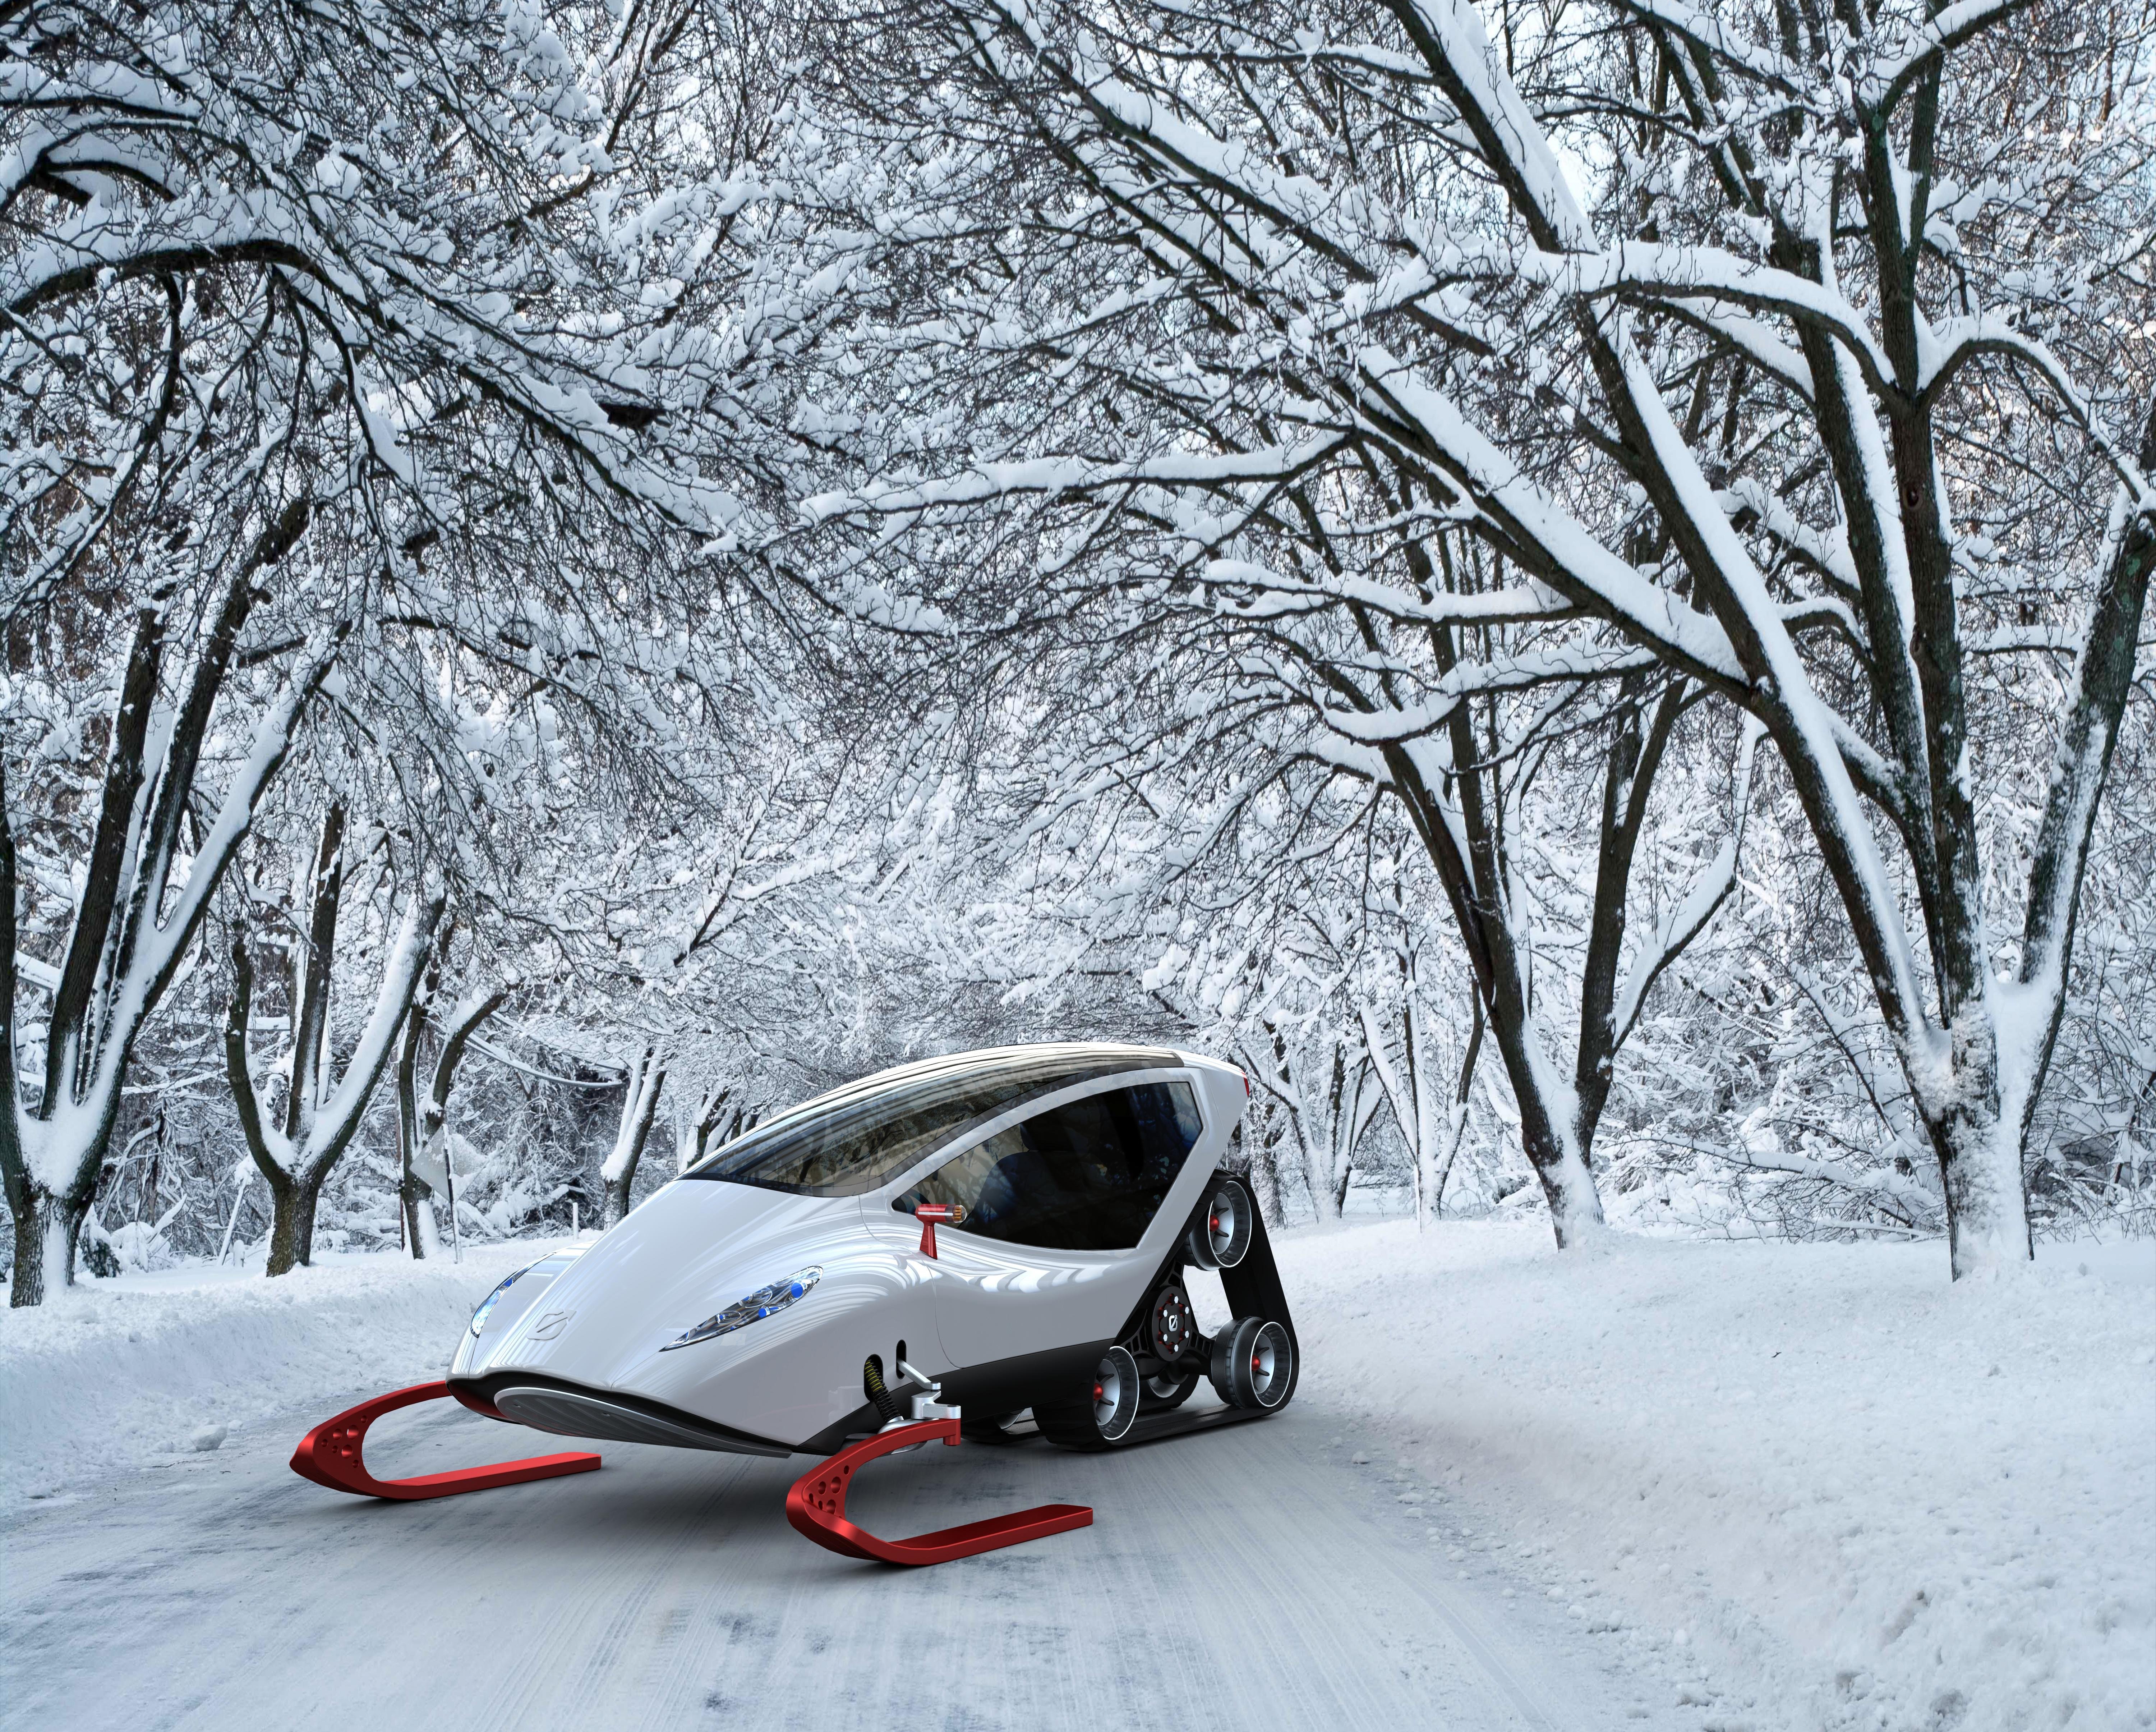 Best Snow Vehicles Machines That Make Traveling Easy